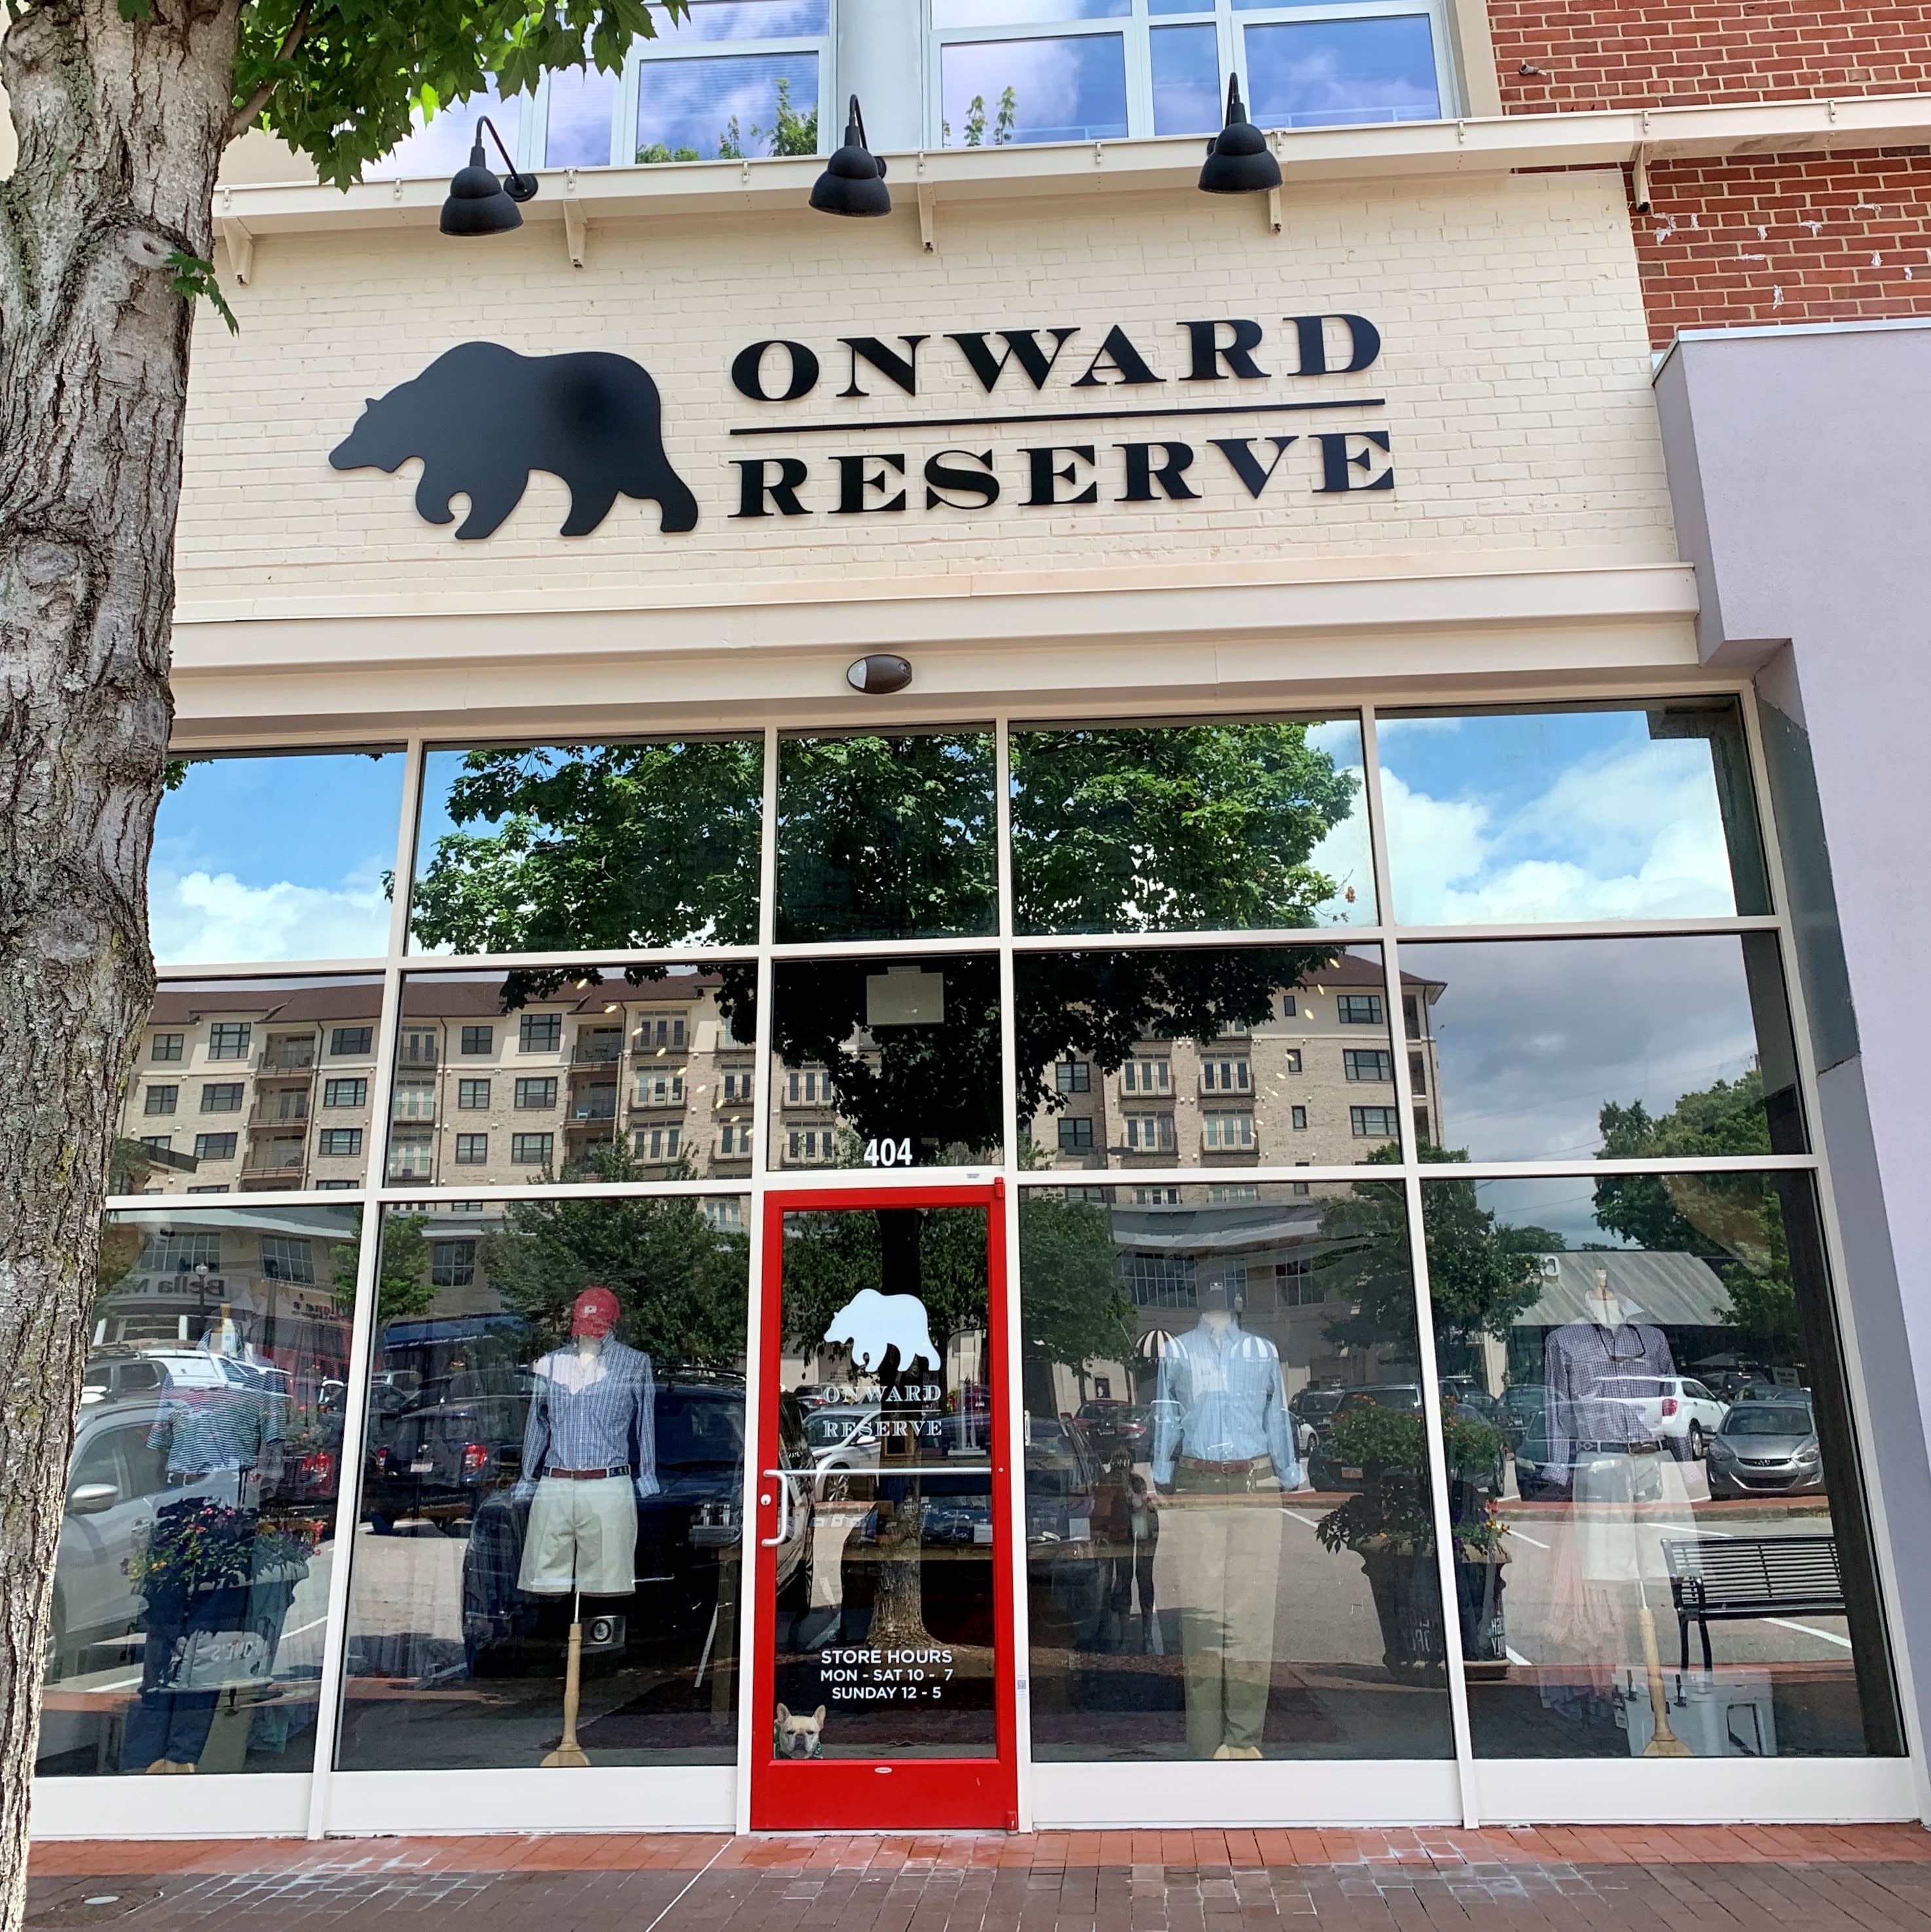 Fall Winter Style For The Guys In Your Life From Onward, 40% OFF